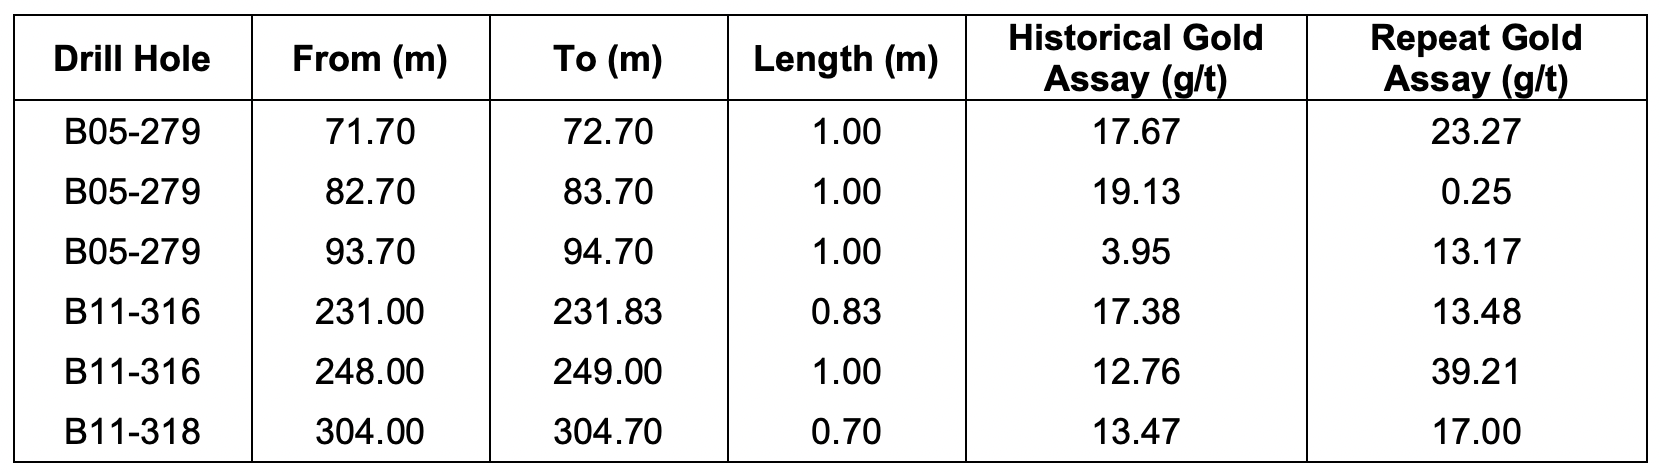 Table 1 High grade gold assay comparison for individual historical